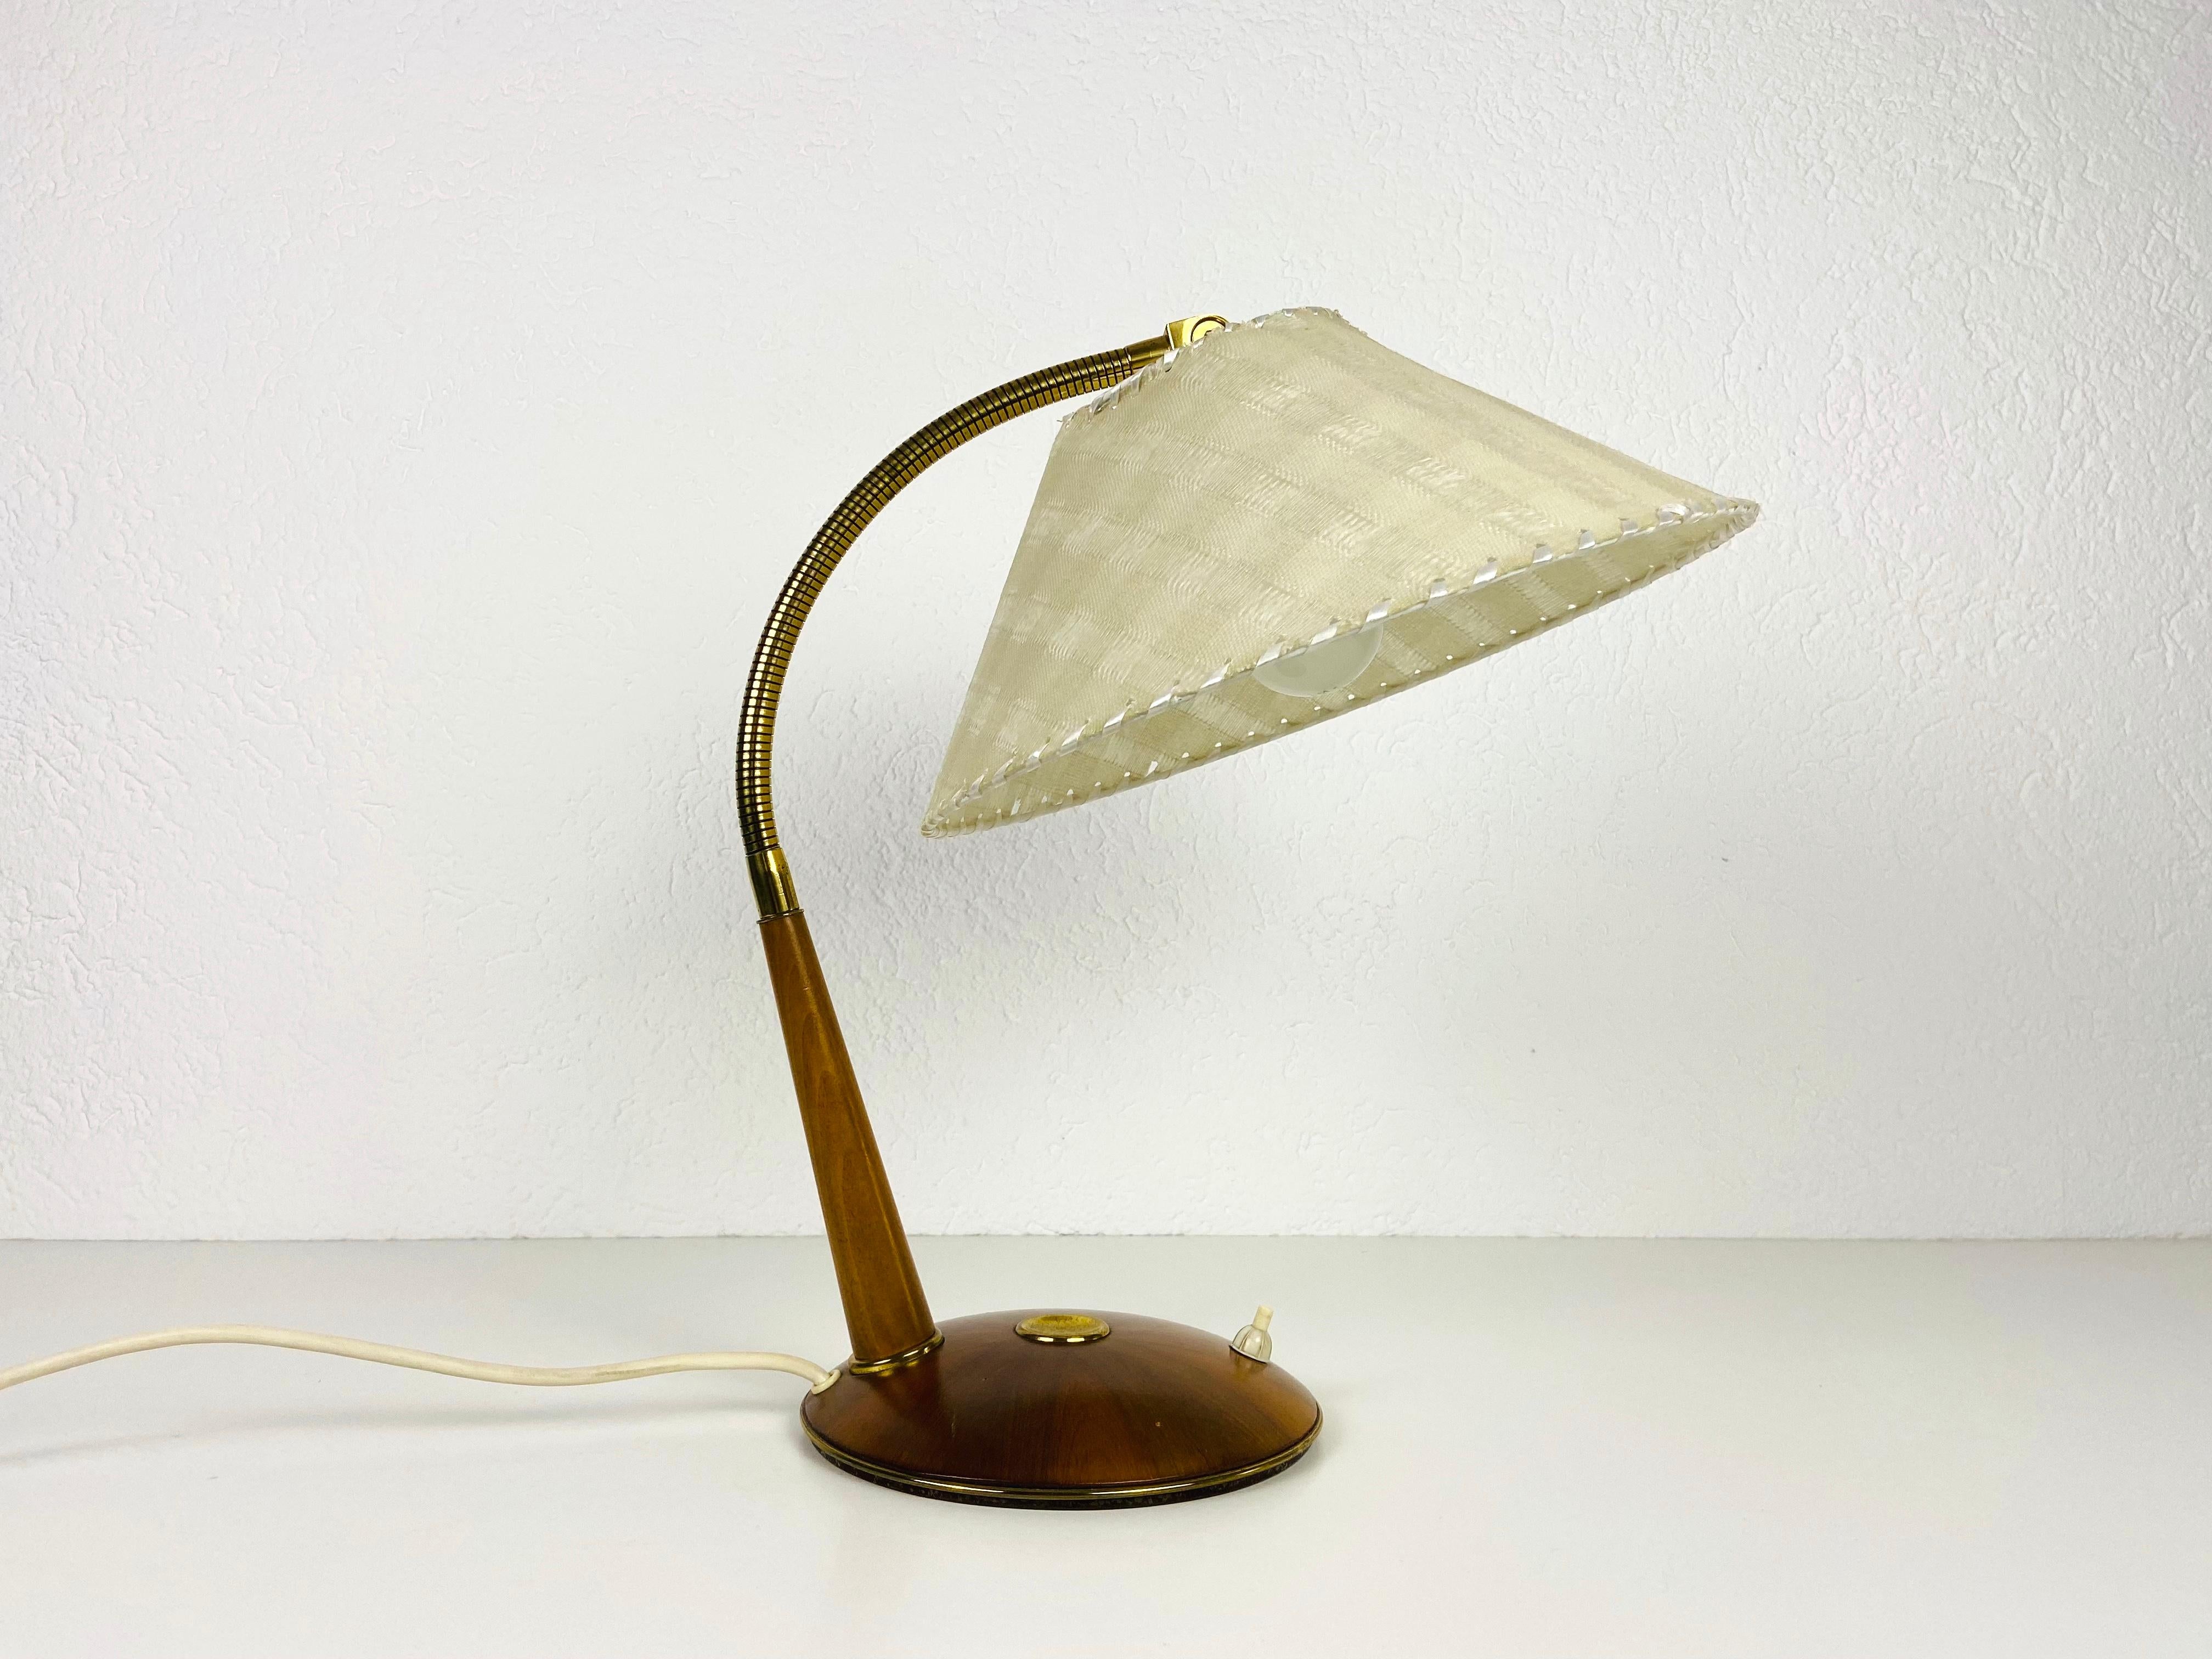 A wonderful teak lamp made in the 1960s by Temde in Switzerland. It is fascinating with its rare lamp shade.

The light requires one E27 (US E26) light bulb. Works with both 120/220V. Good vintage condition.

Free worldwide express shipping.